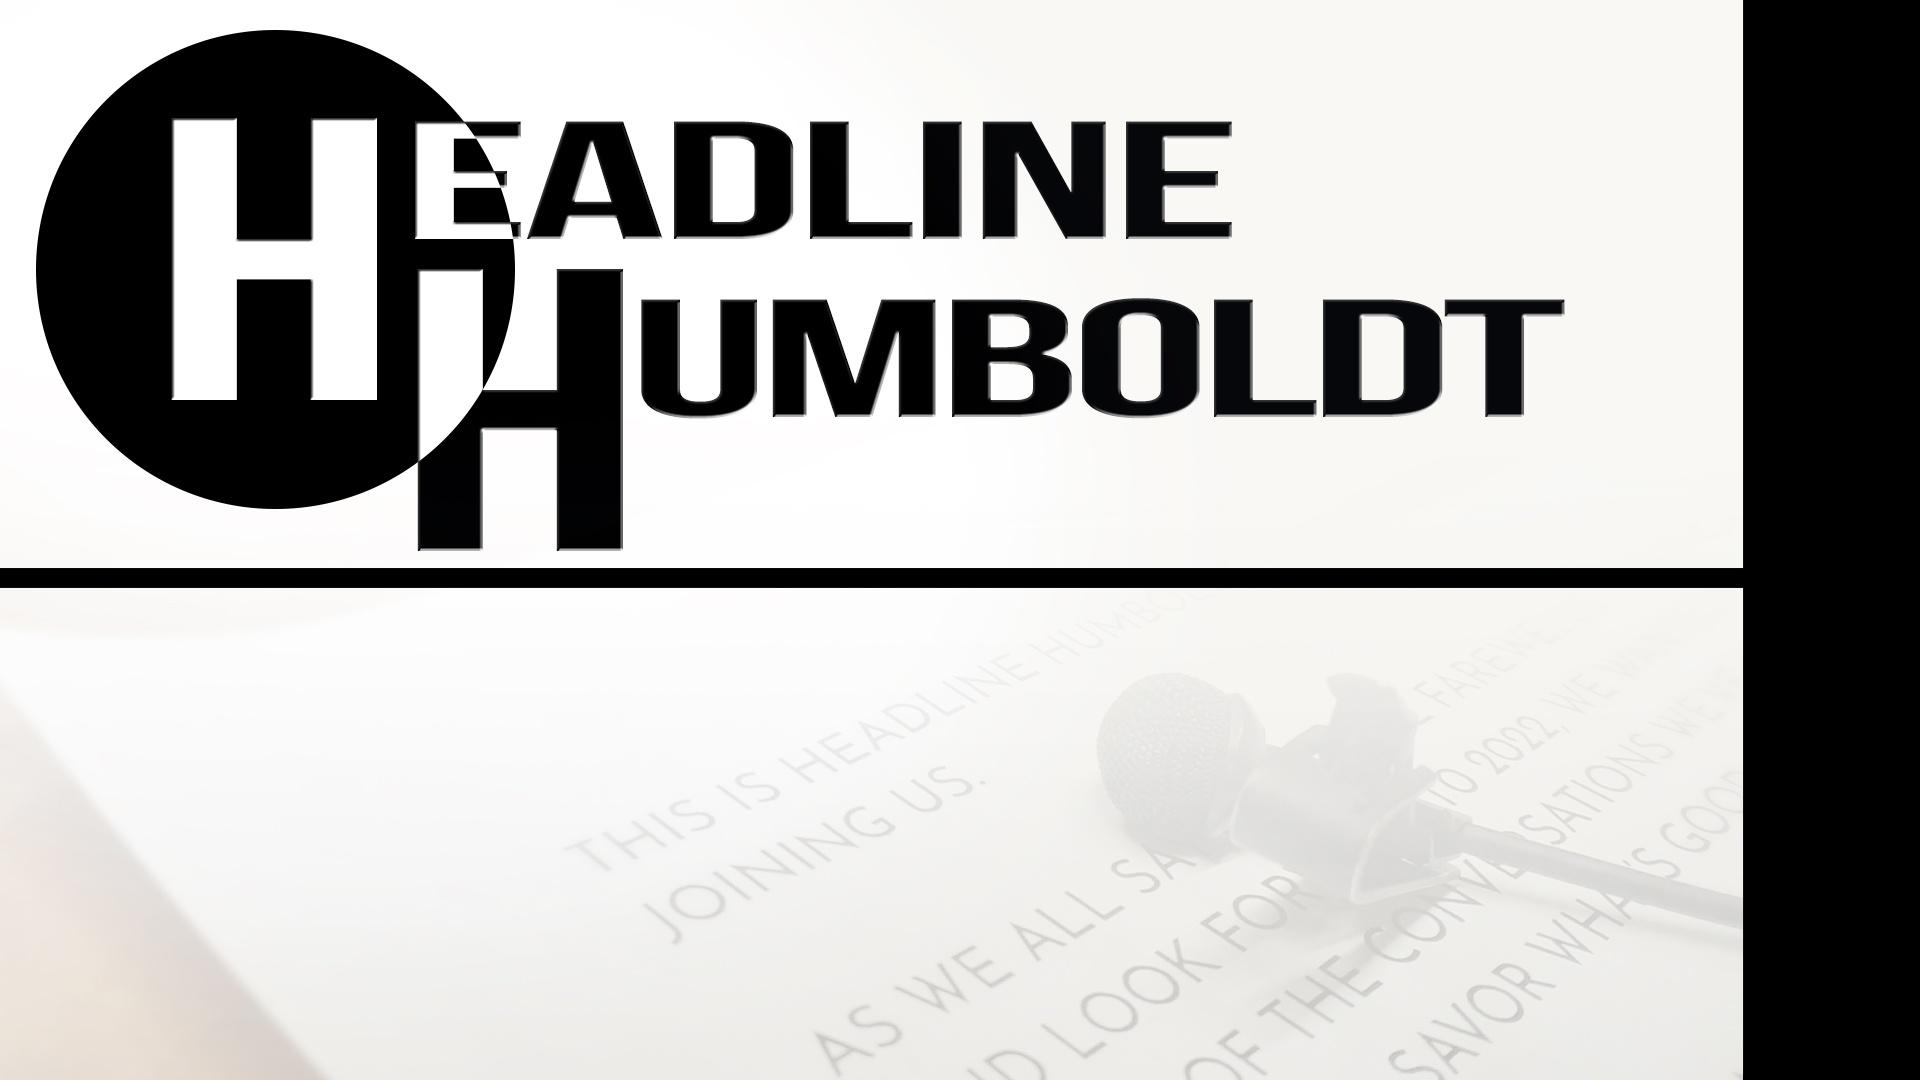 black and white image, a lav mic rests on paper scripts. text: headline humboldt 